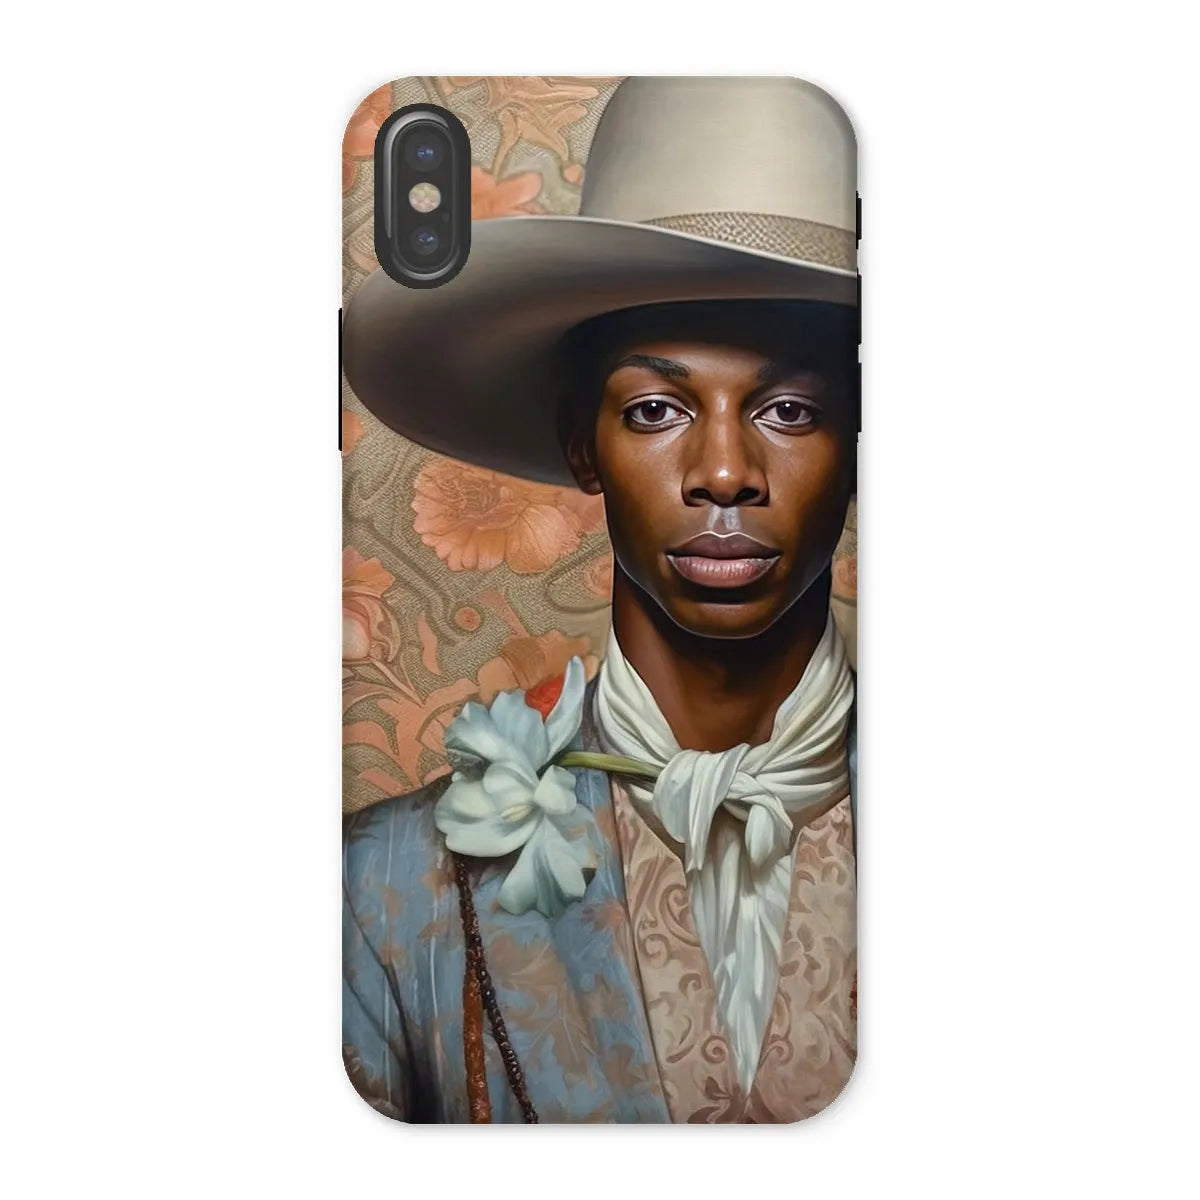 Apollo The Gay Cowboy - Gay Aesthetic Art Phone Case - Iphone x / Matte - Mobile Phone Cases - Aesthetic Art